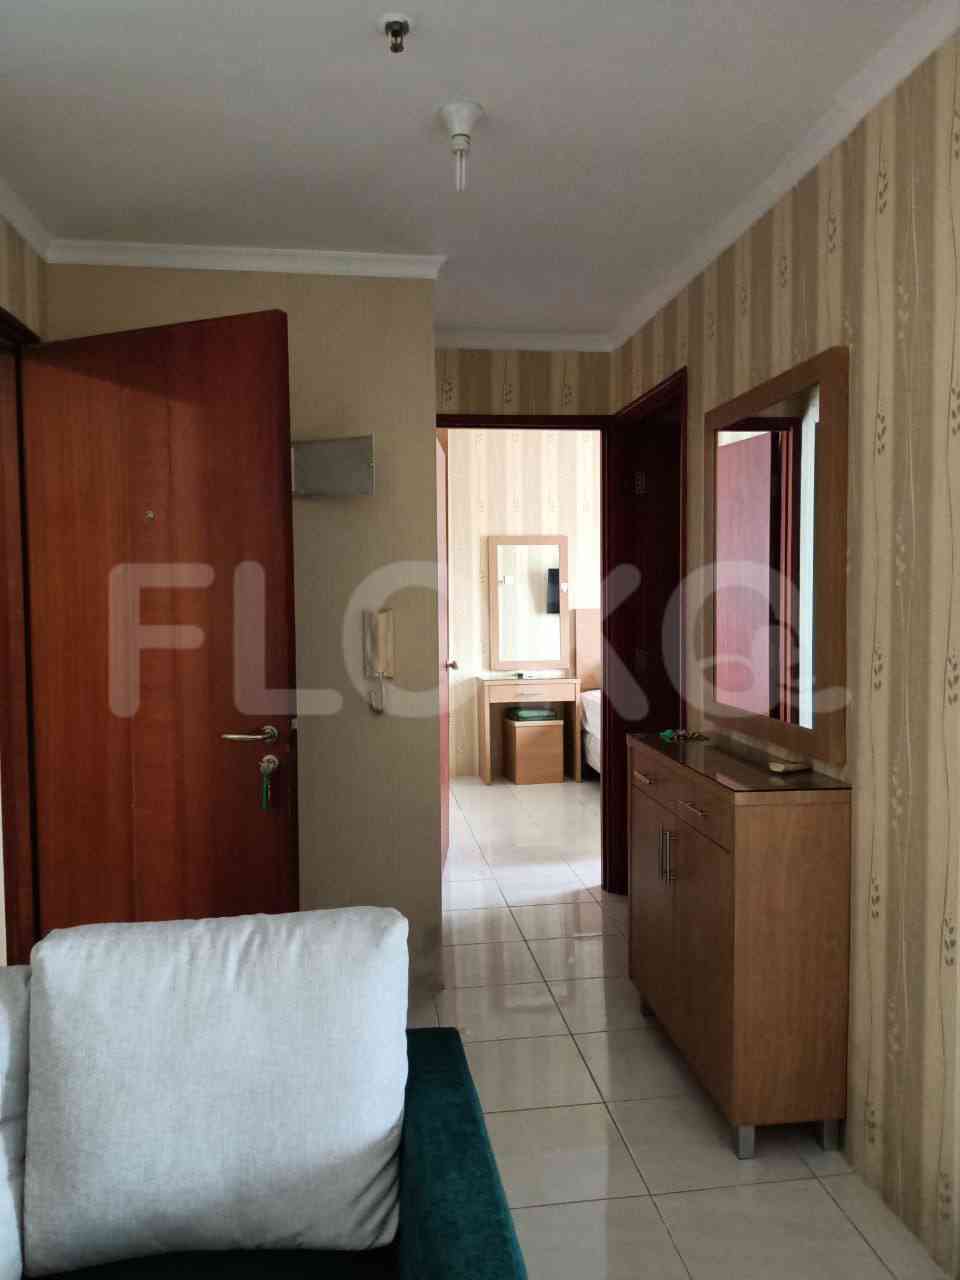 2 Bedroom on 7th Floor for Rent in Sudirman Park Apartment - ftad1f 7